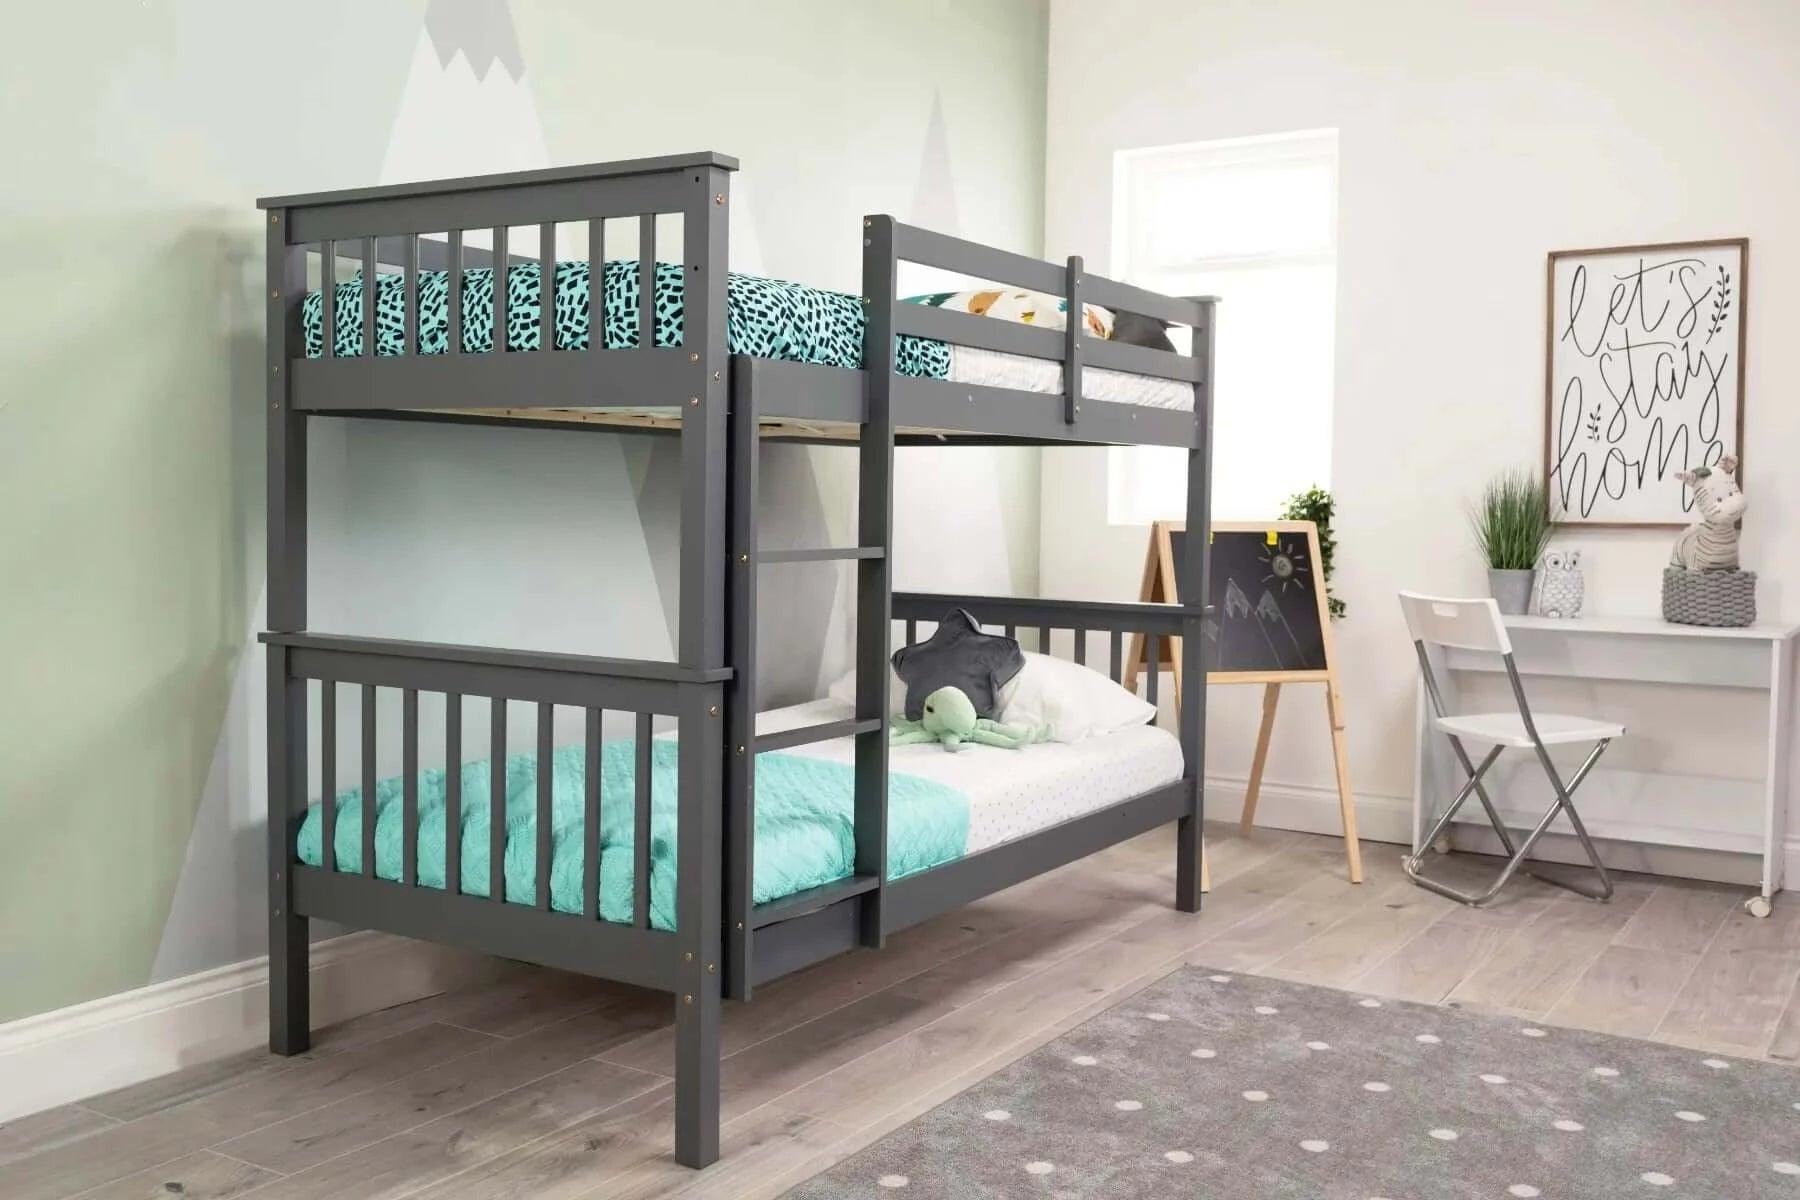 pine wood bunk bed frame back view